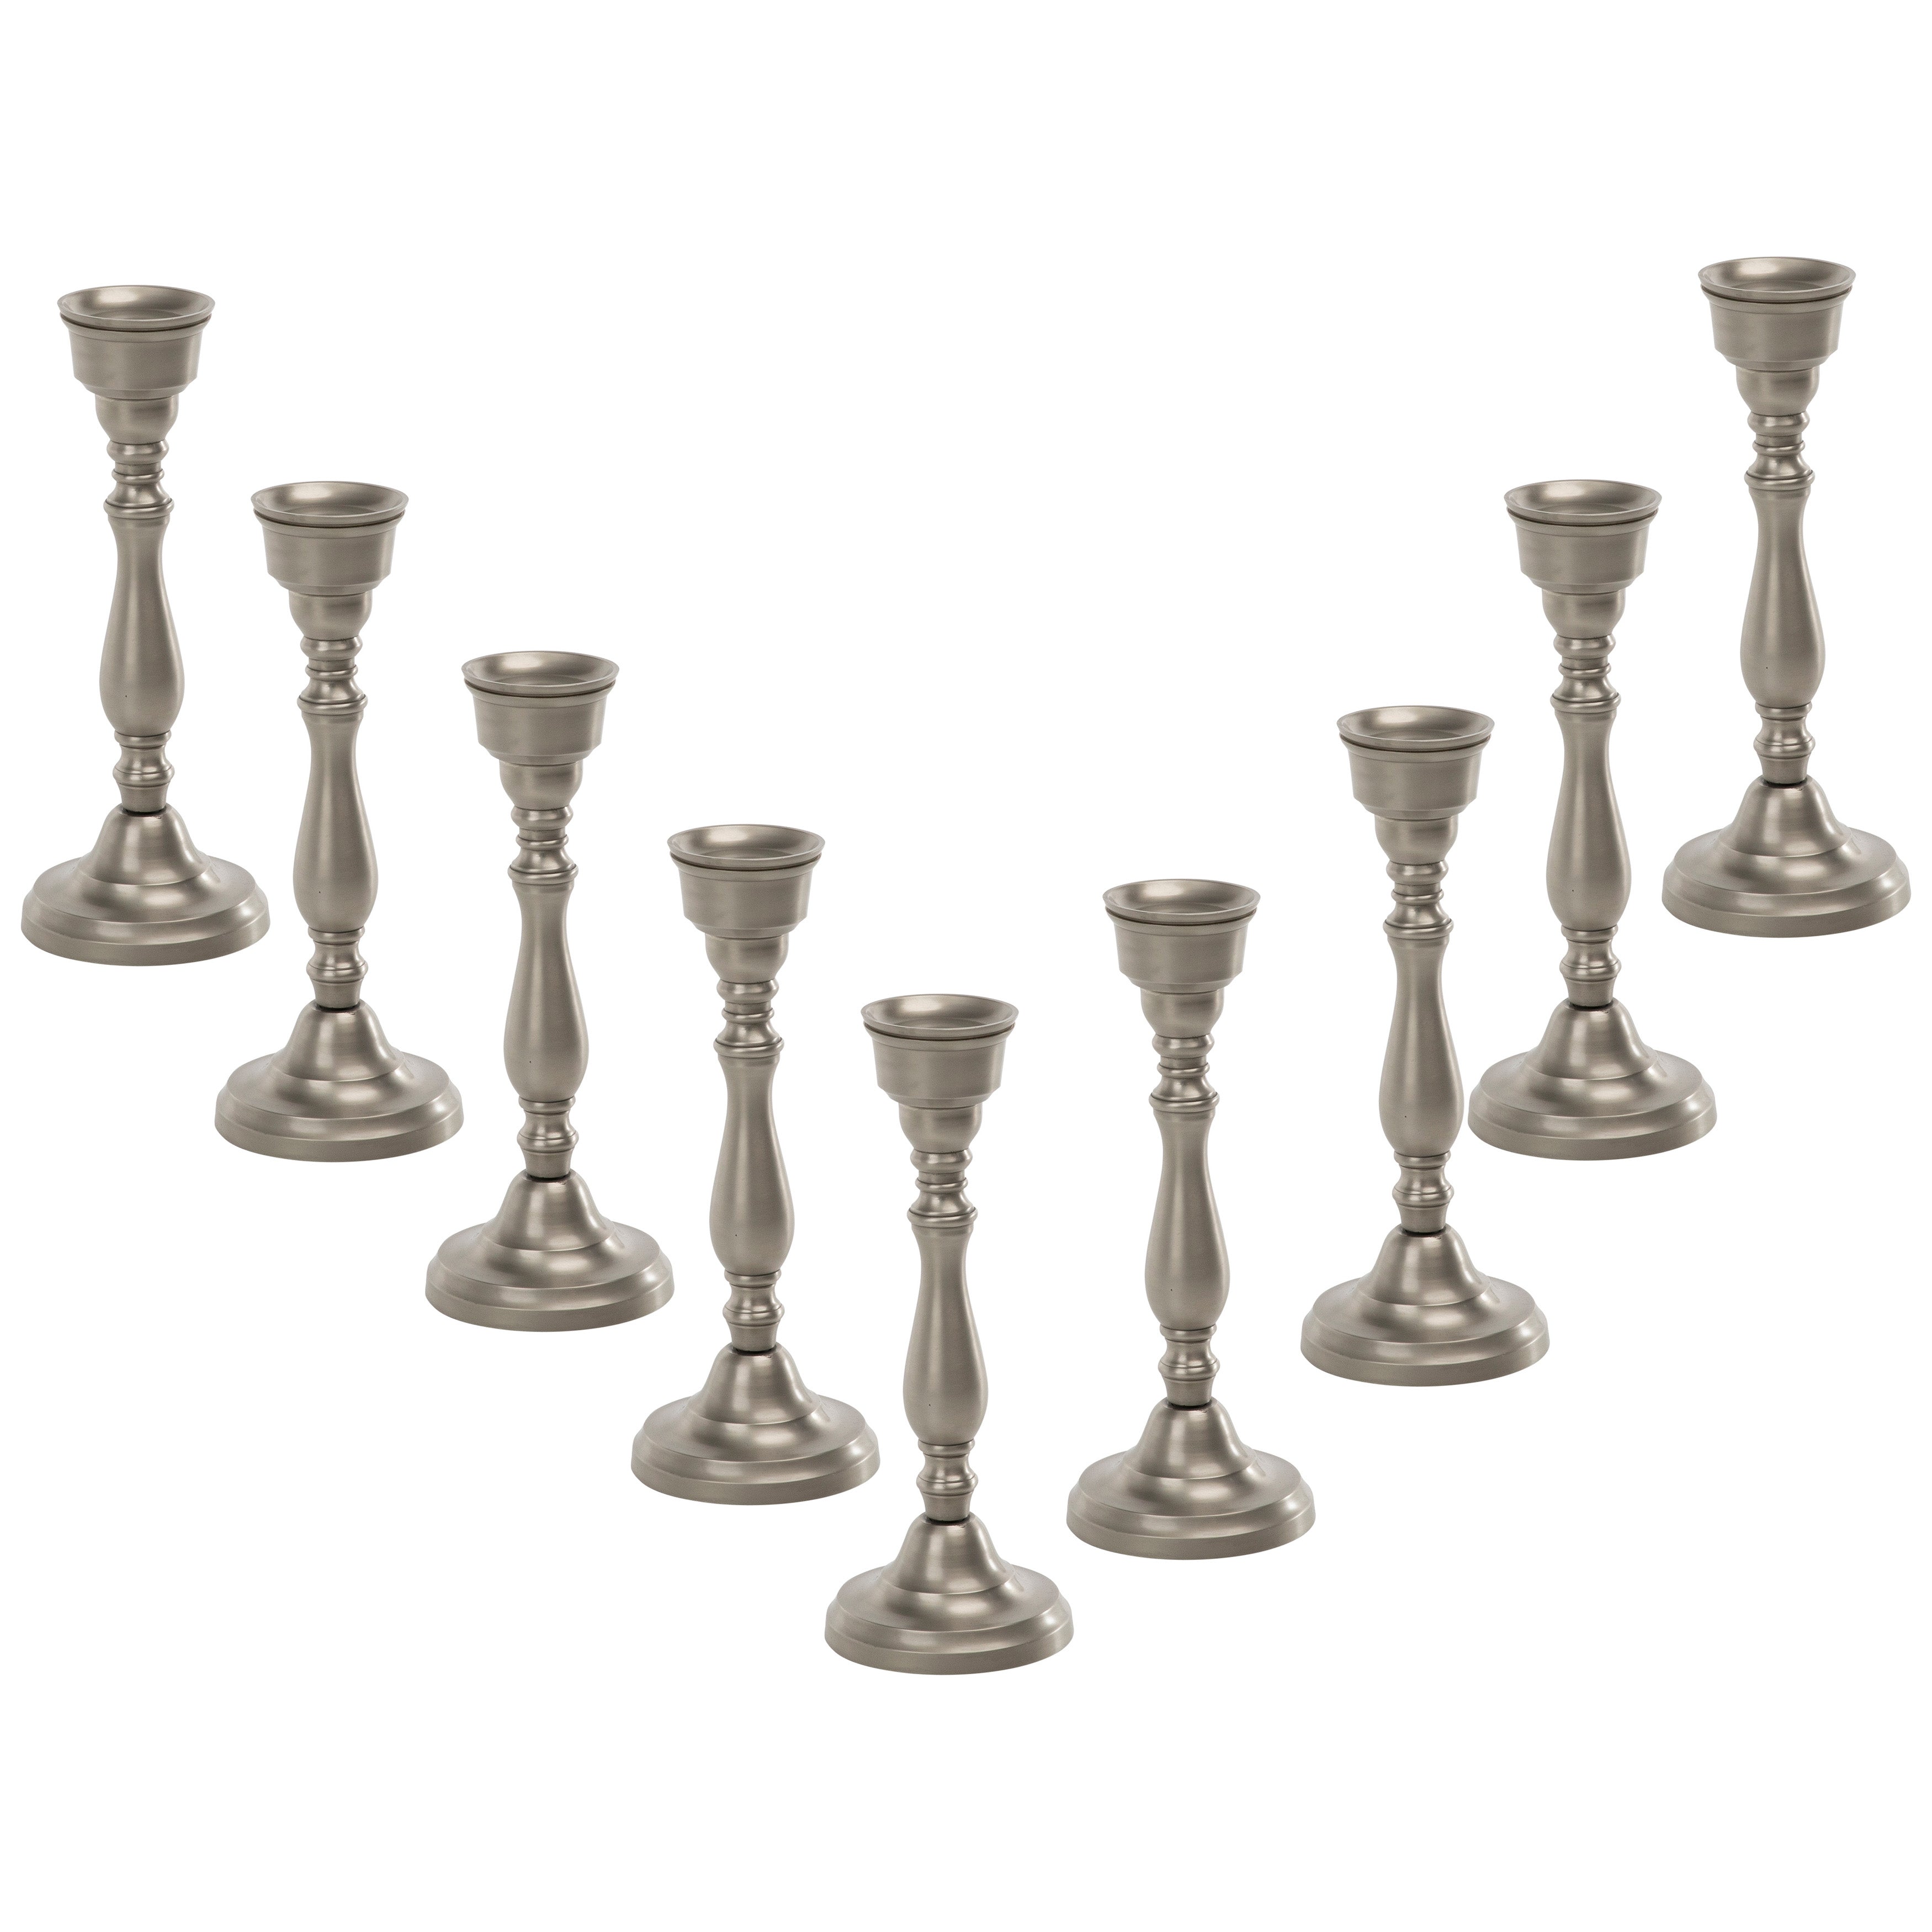 Candlestand Pewter Finish Set of 9 - What A Room